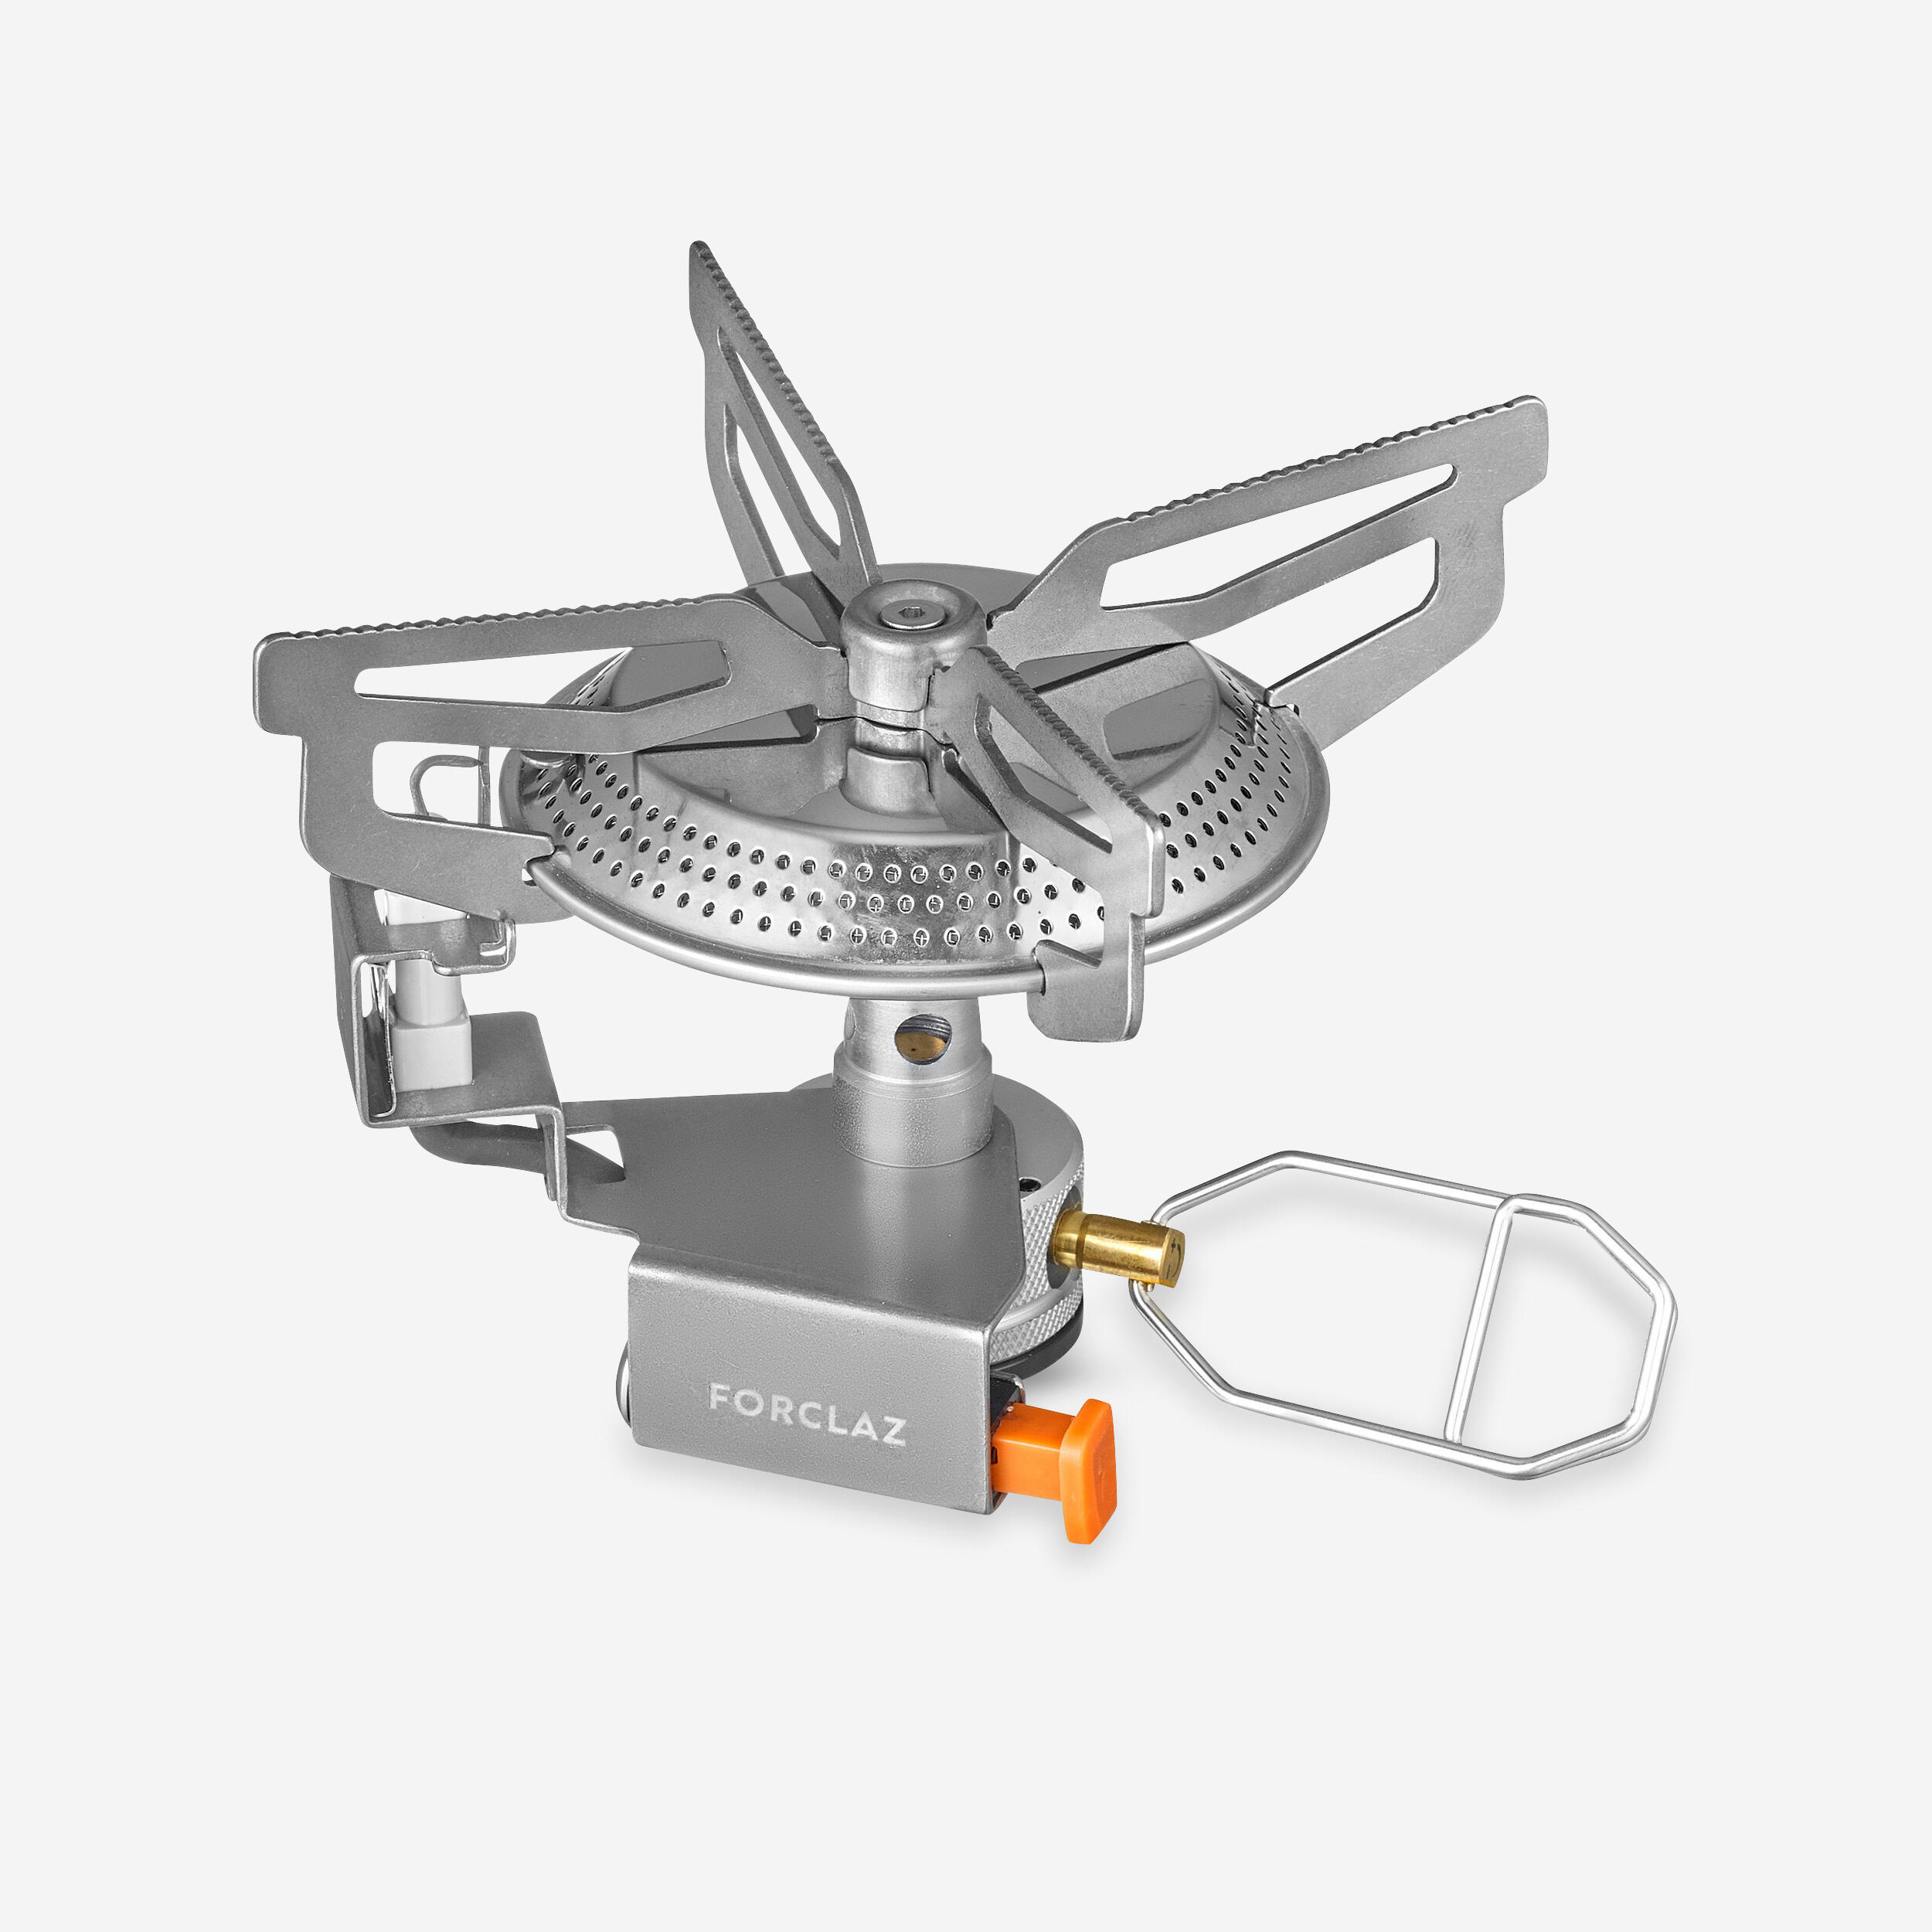 Gas stove with lighter - MT100 1/8